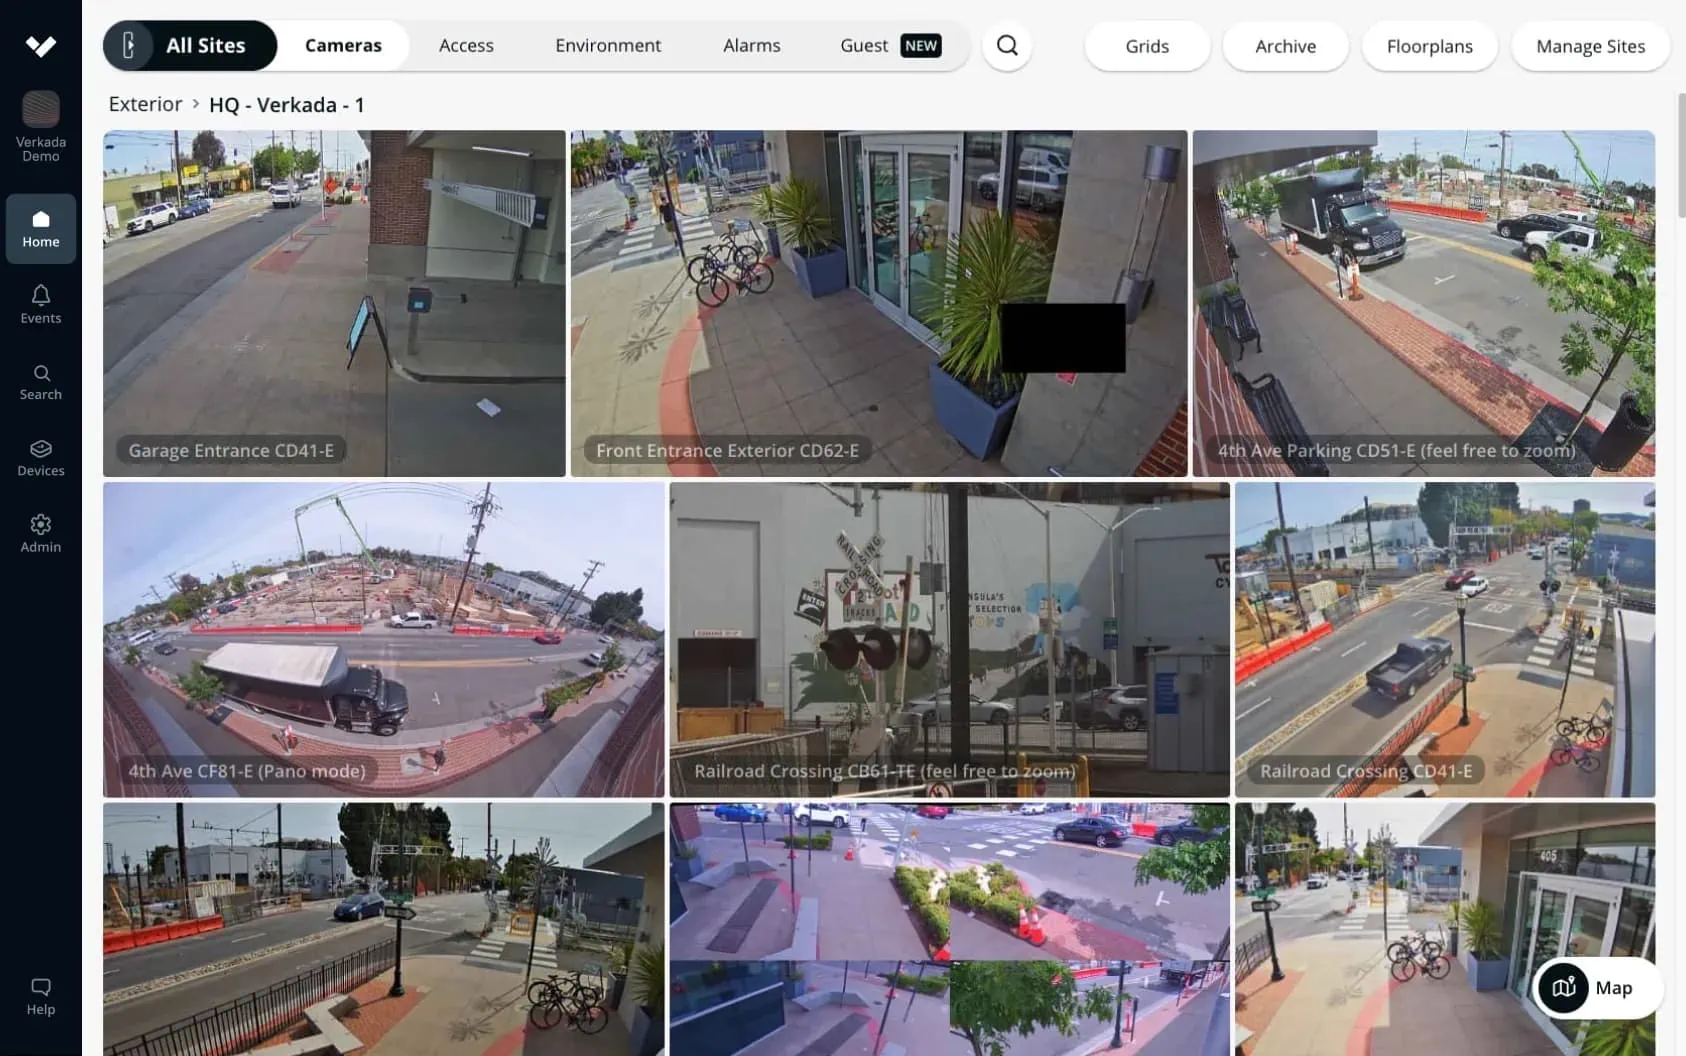 Footage captured by best surveillance cameras with AI